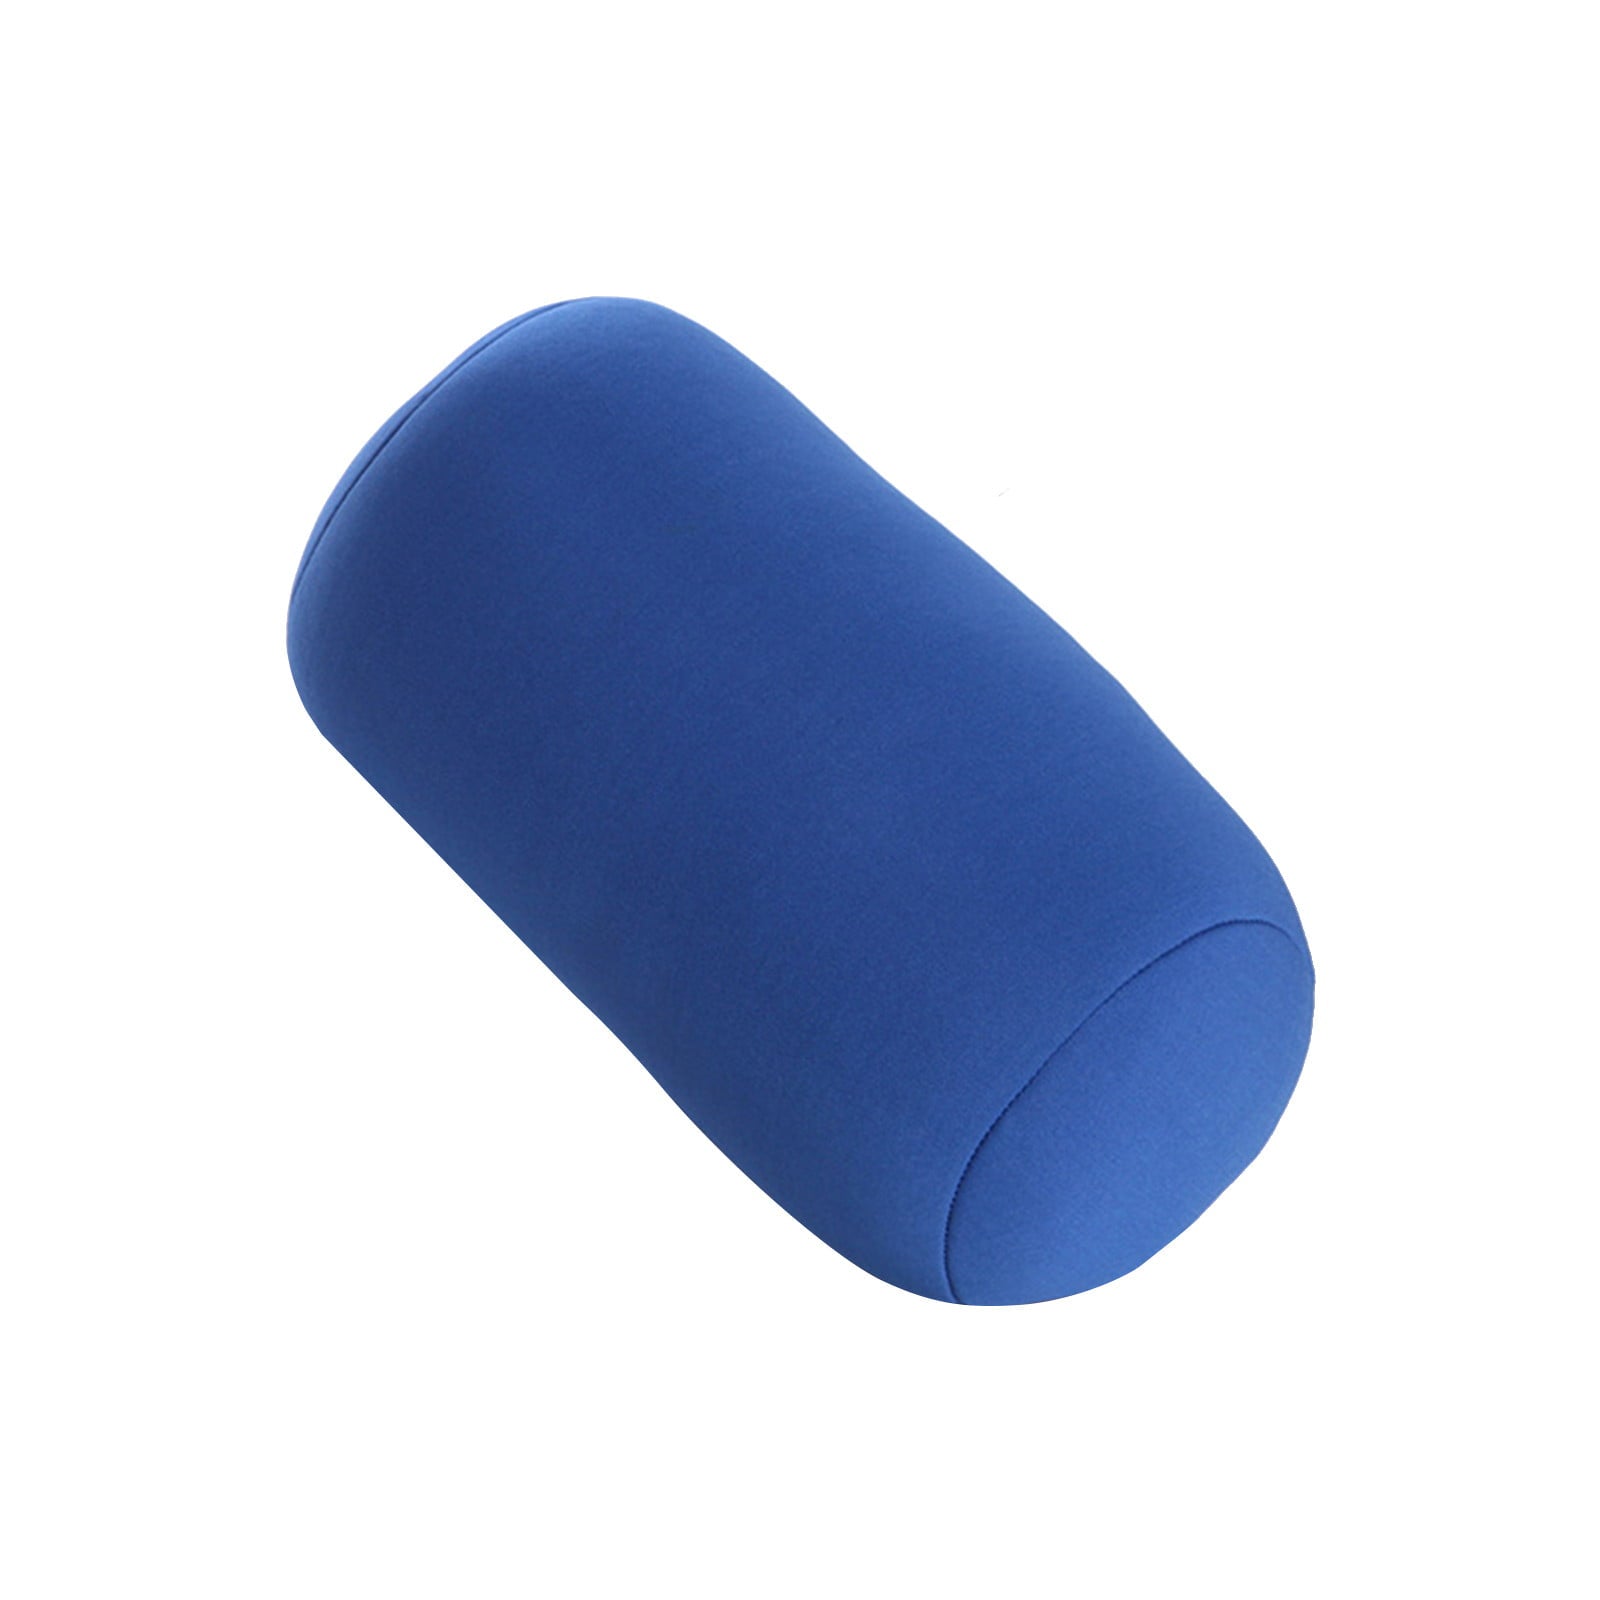 SQUARE CARMEN Cylinder Memory Foam Pillow Roll Cervical Bolster Round Nap Neck Pillow Cushion, Blue